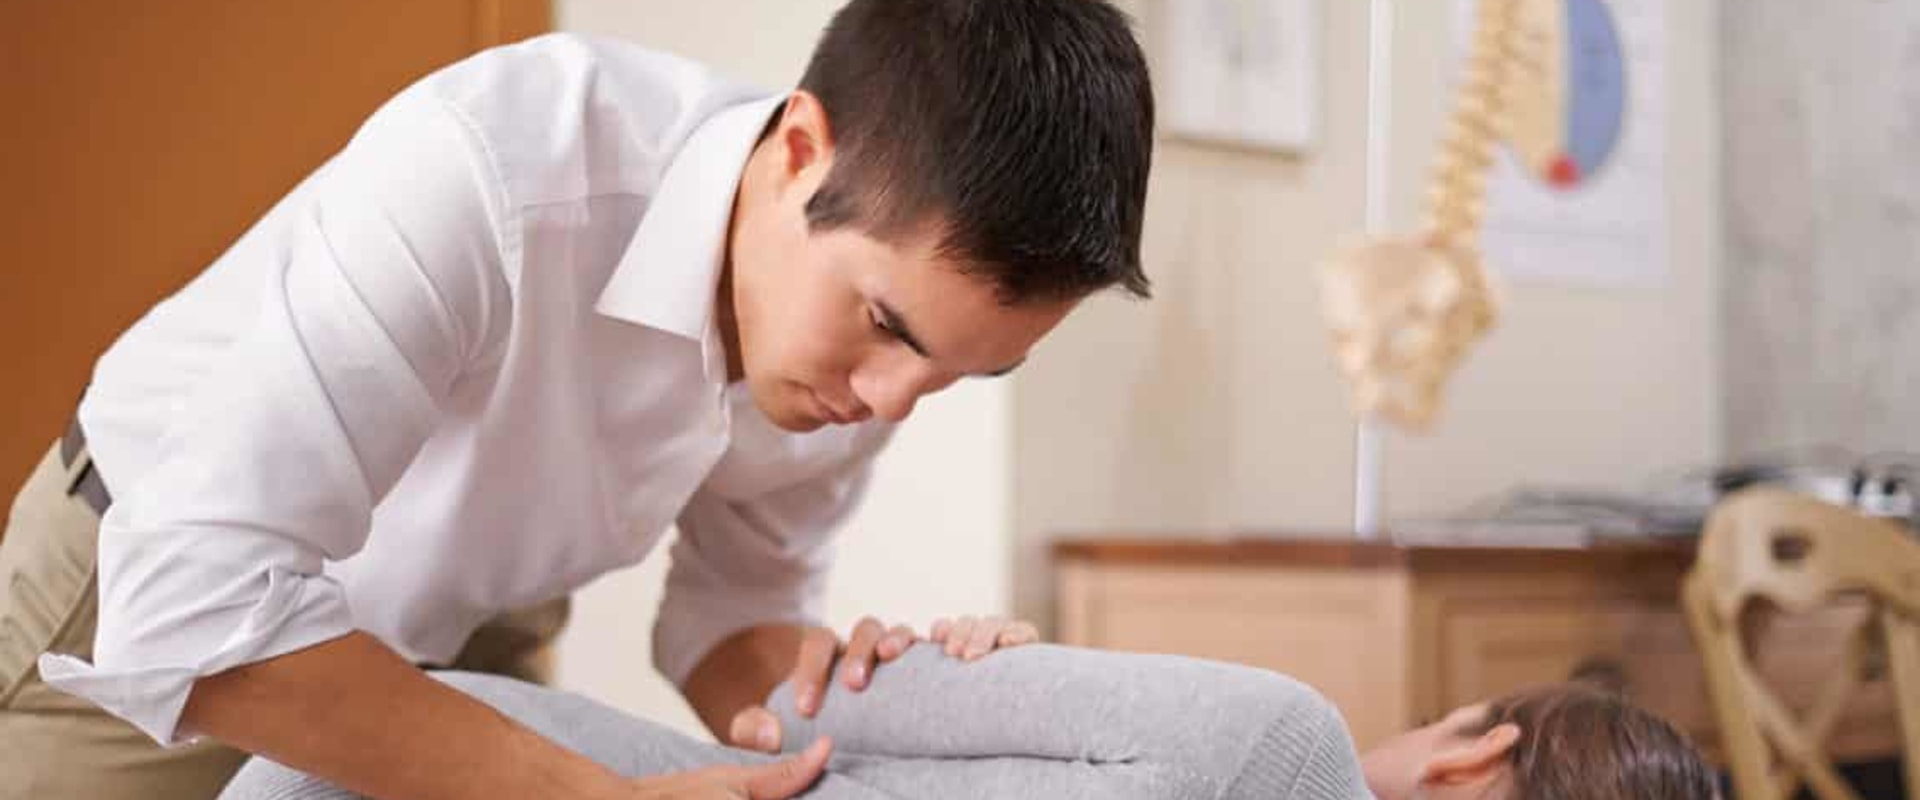 Can a chiropractic adjustment cause inflammation?